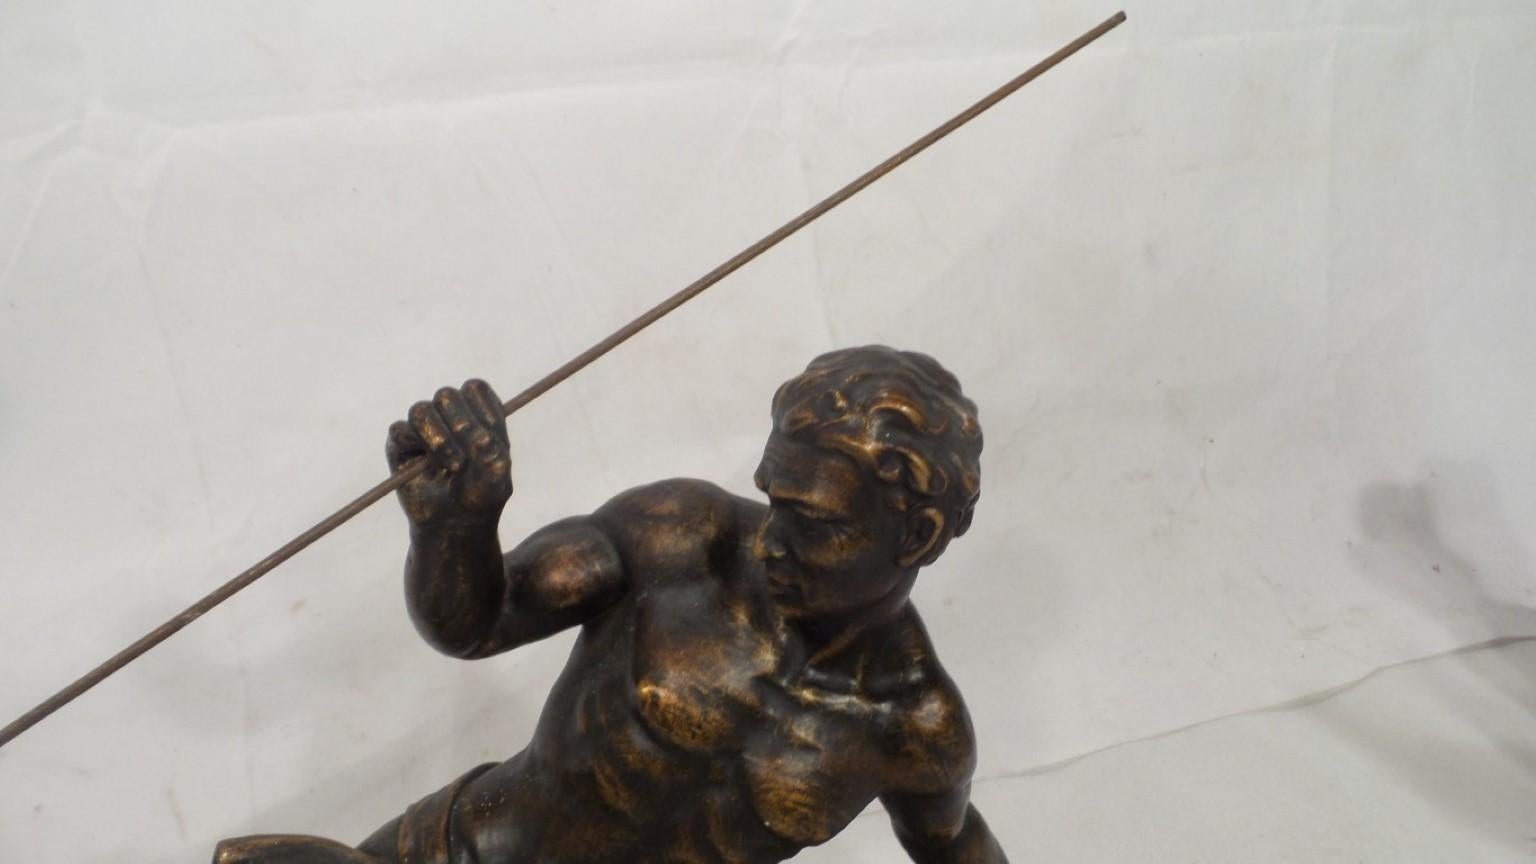 An outstanding original Art Deco figure signed by the renowned artist S Melani. The sculpture is of a powerful Olympiad Spear Thrower. In bronzed plaster set on a polished black marble base. This wonderful sculpture defines Power with its muscular